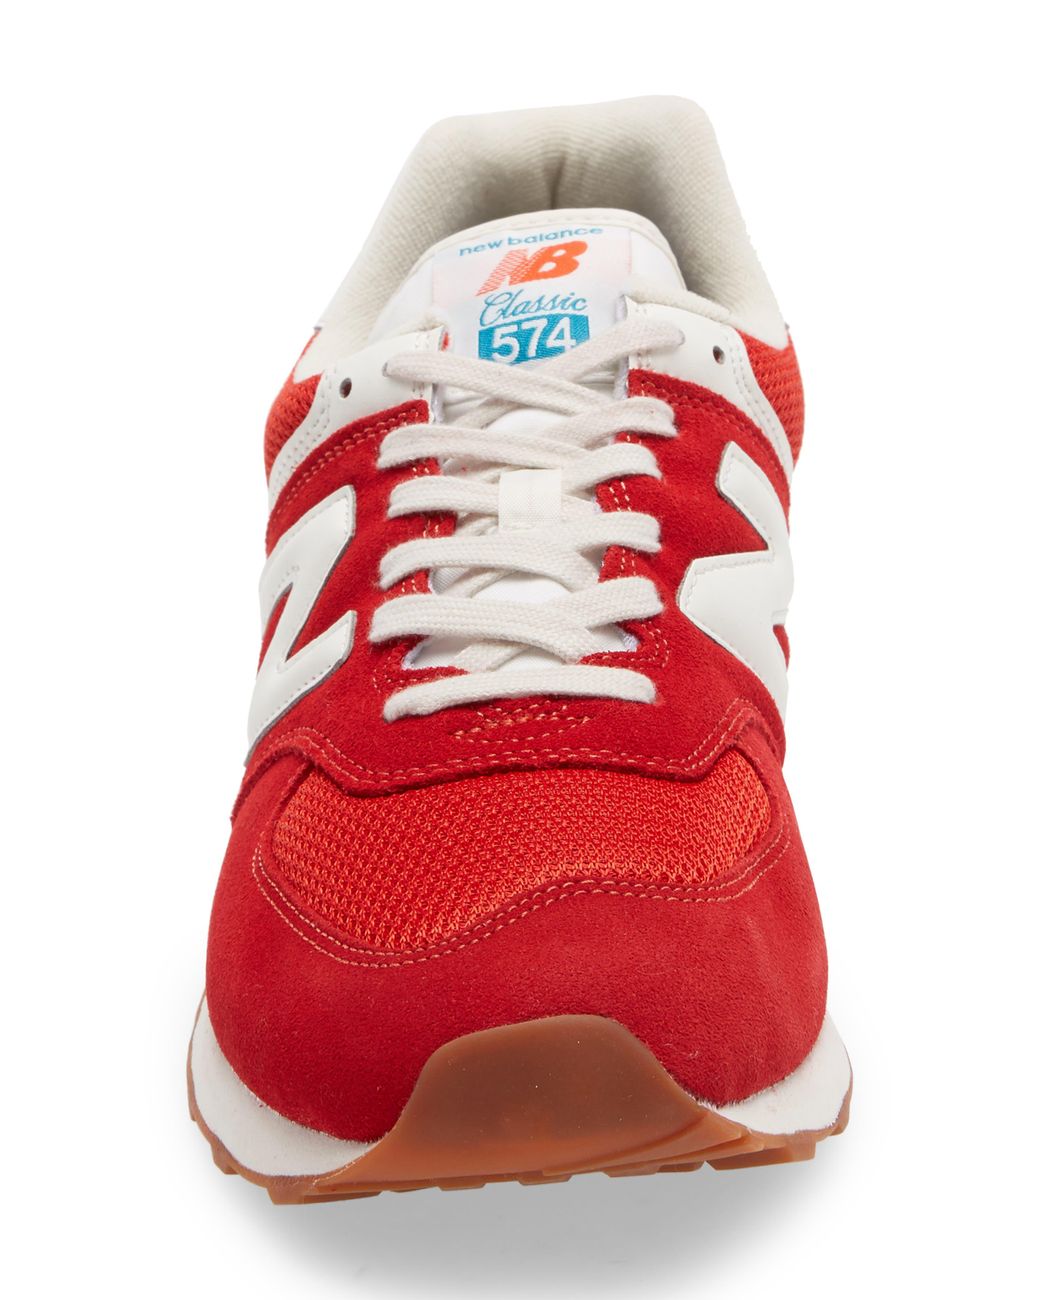 New Balance 574 Classic Sneaker In Team Red At Nordstrom Rack | Lyst